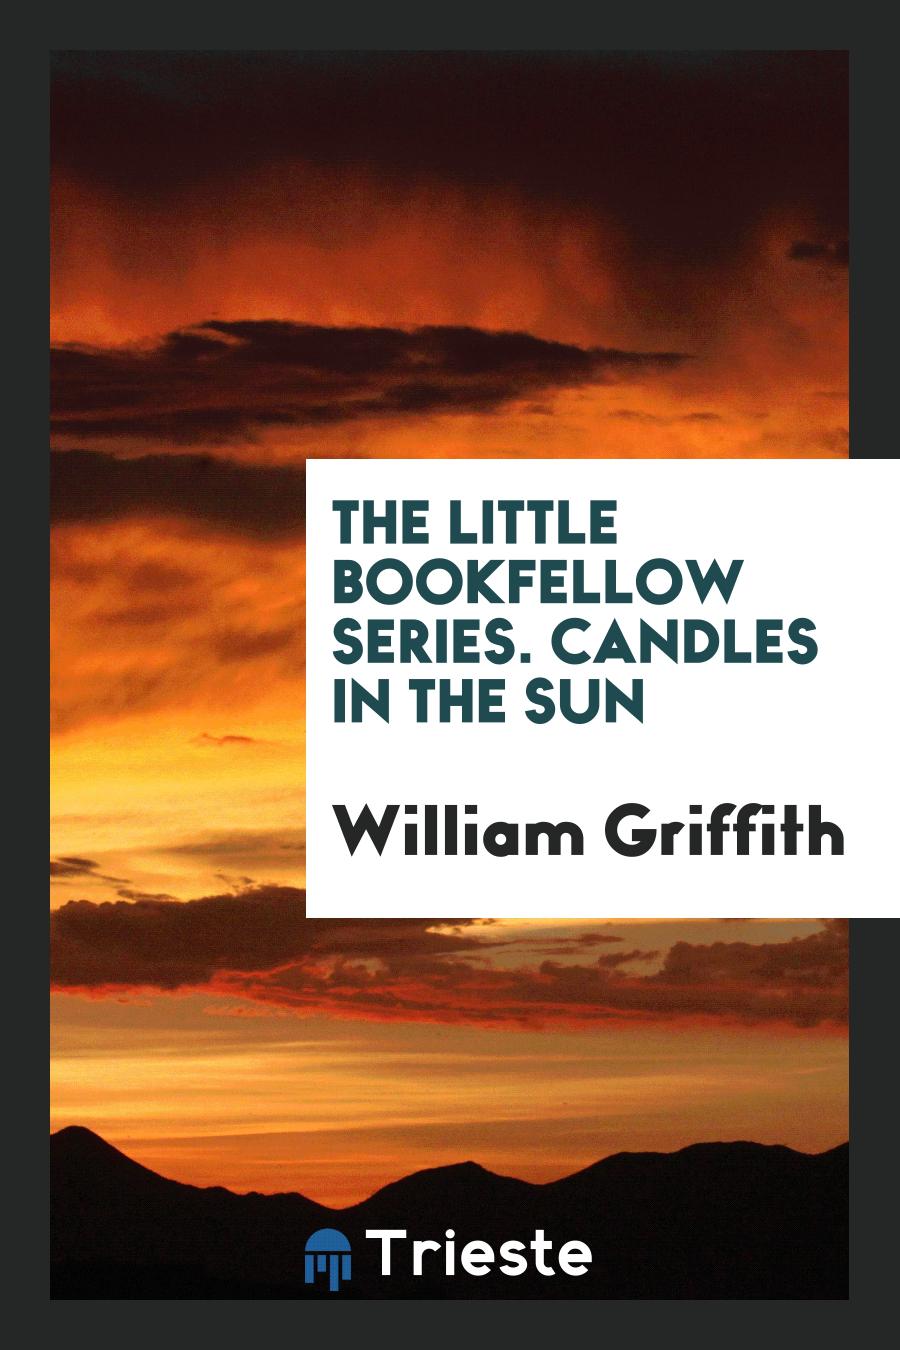 The Little Bookfellow series. Candles in the Sun